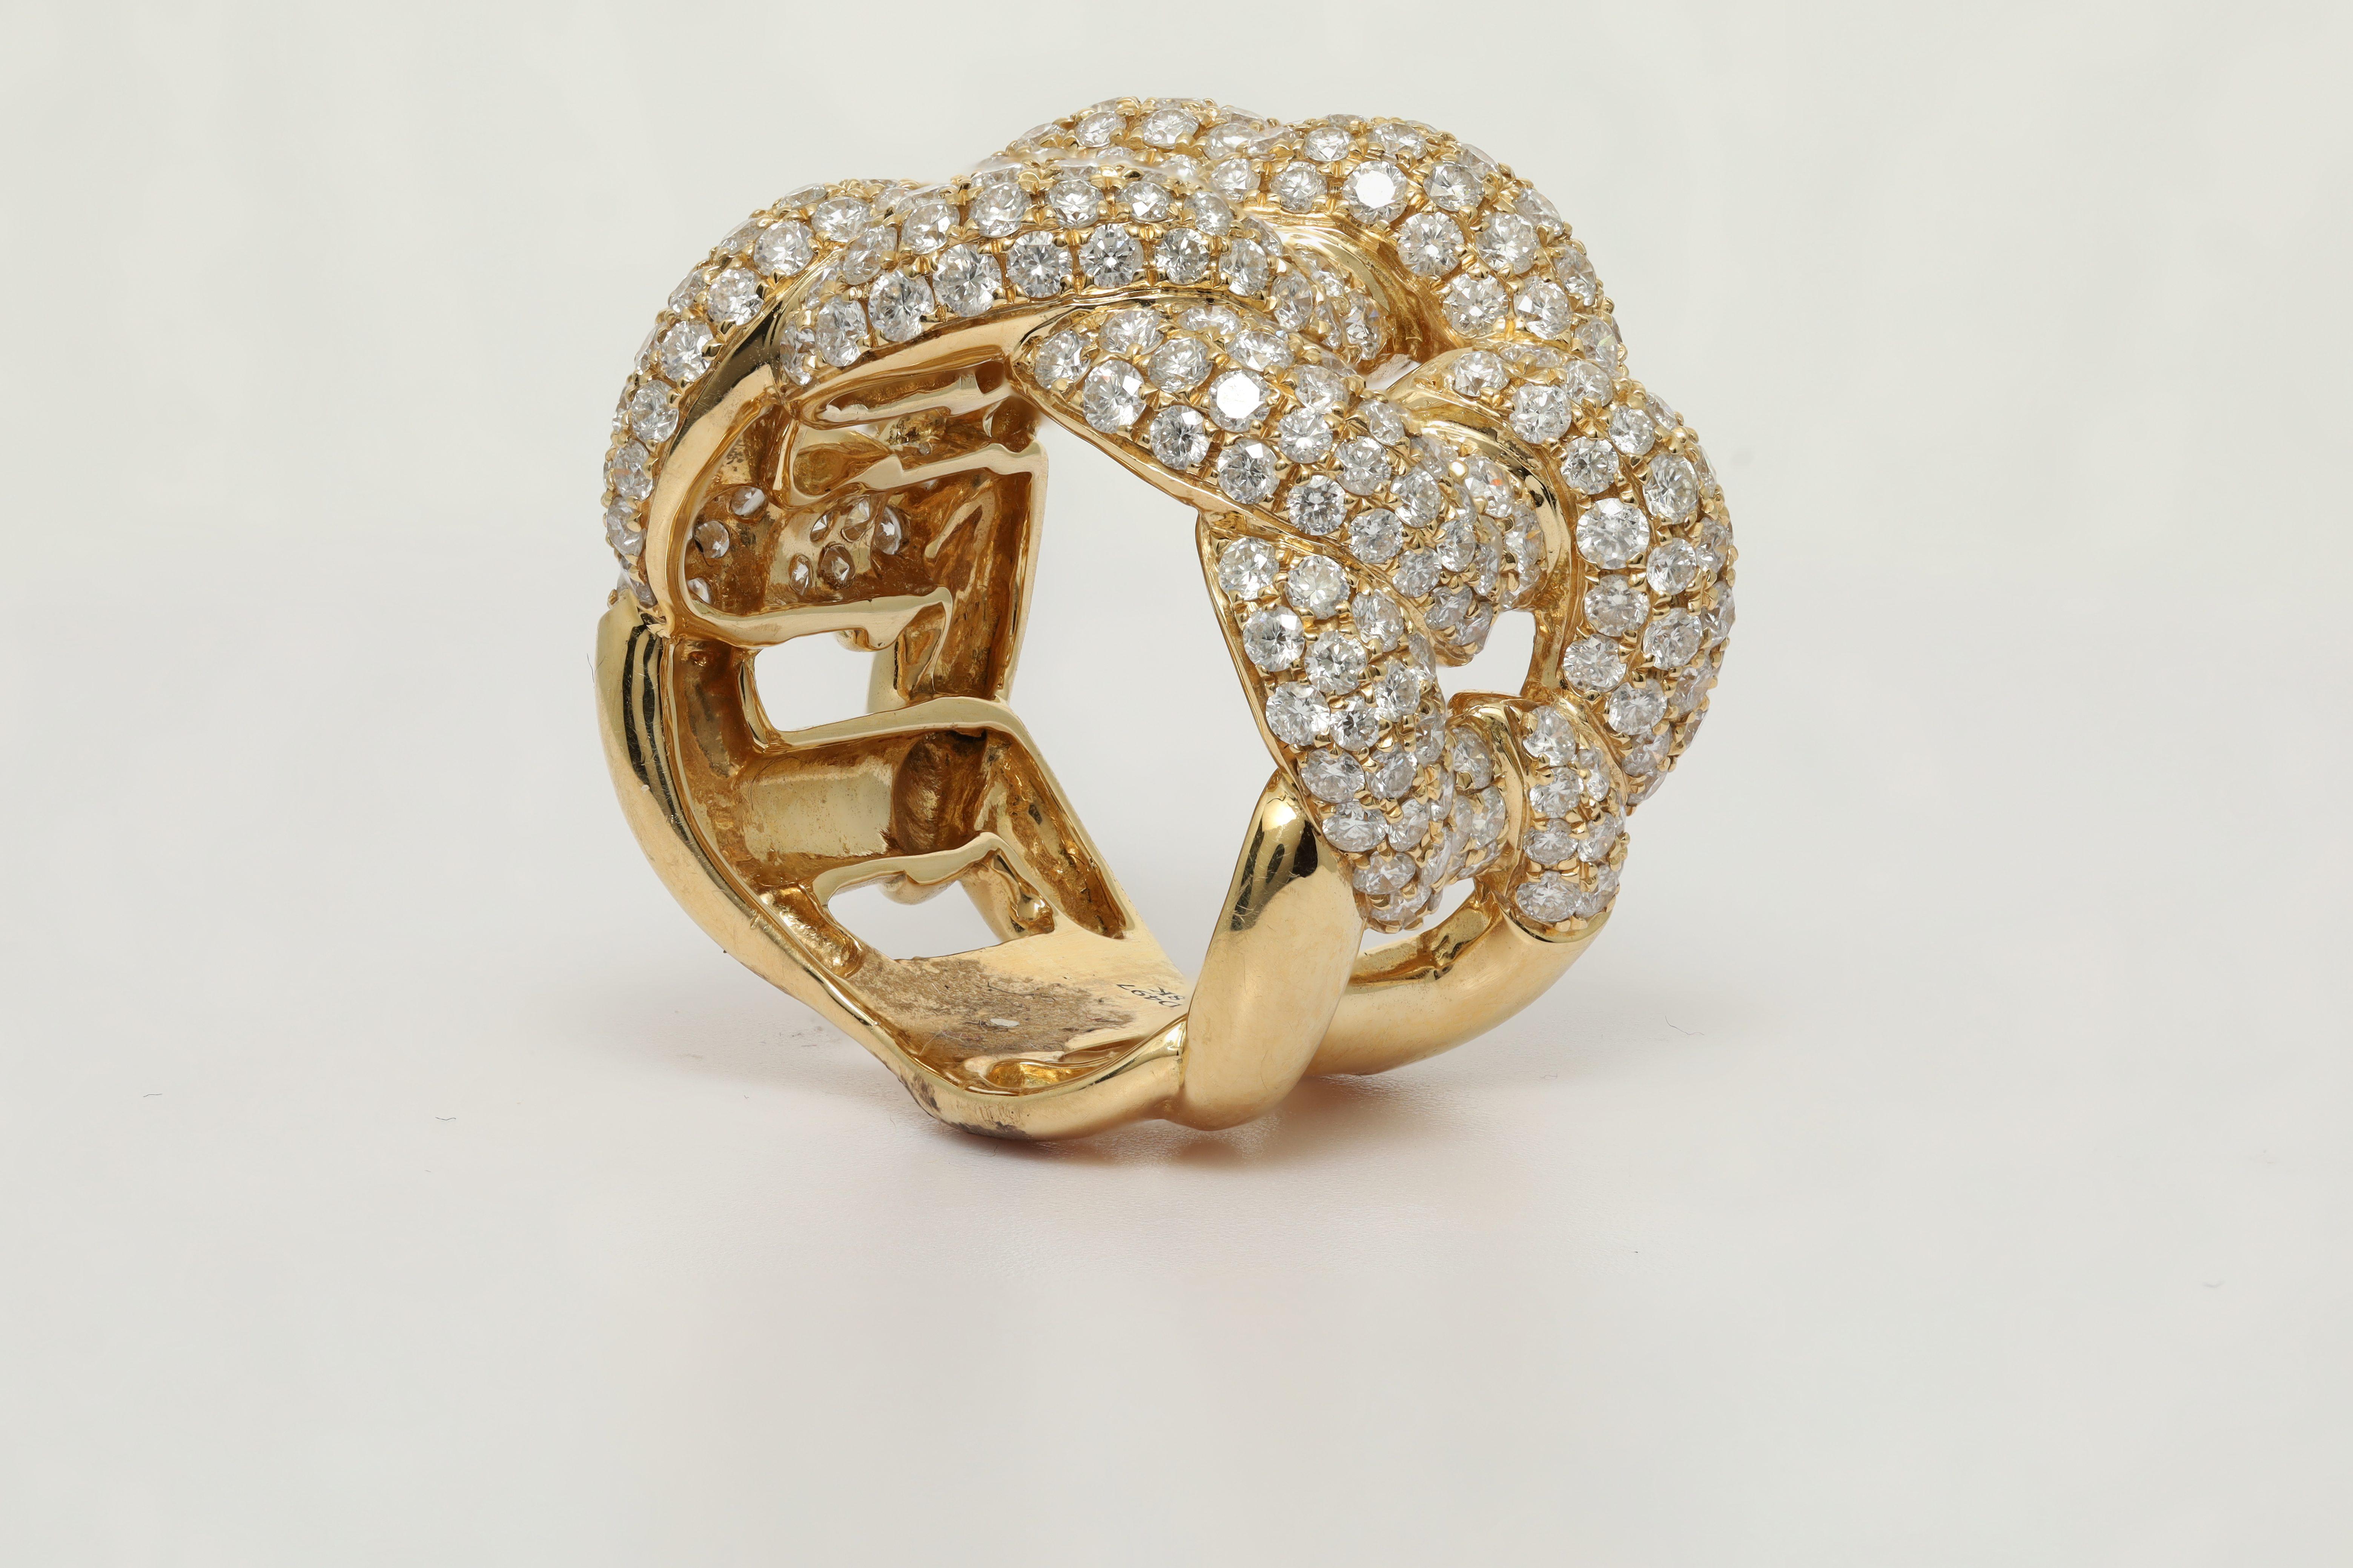 18 kt yellow gold link ring adorned with 5.50 cts tw of diamonds in a spiral design 
Diana M. is a leading supplier of top-quality fine jewelry for over 35 years.
Diana M is one-stop shop for all your jewelry shopping, carrying line of diamond